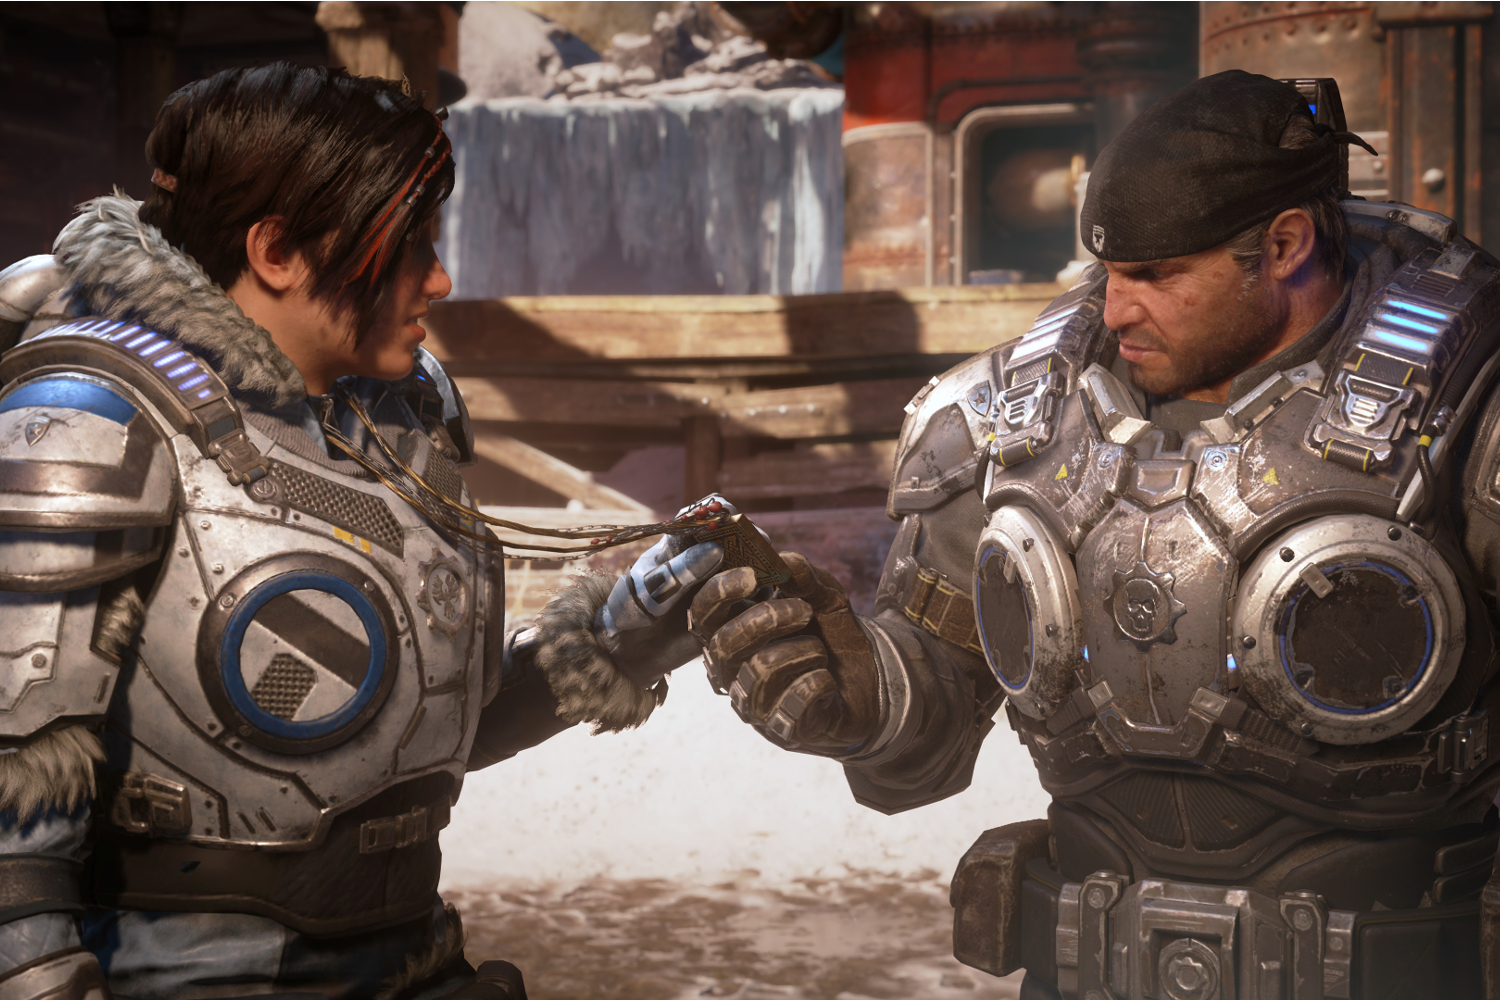 Gears 5 Campaign Hands On: Adding More Chaos to the Bulletstorm